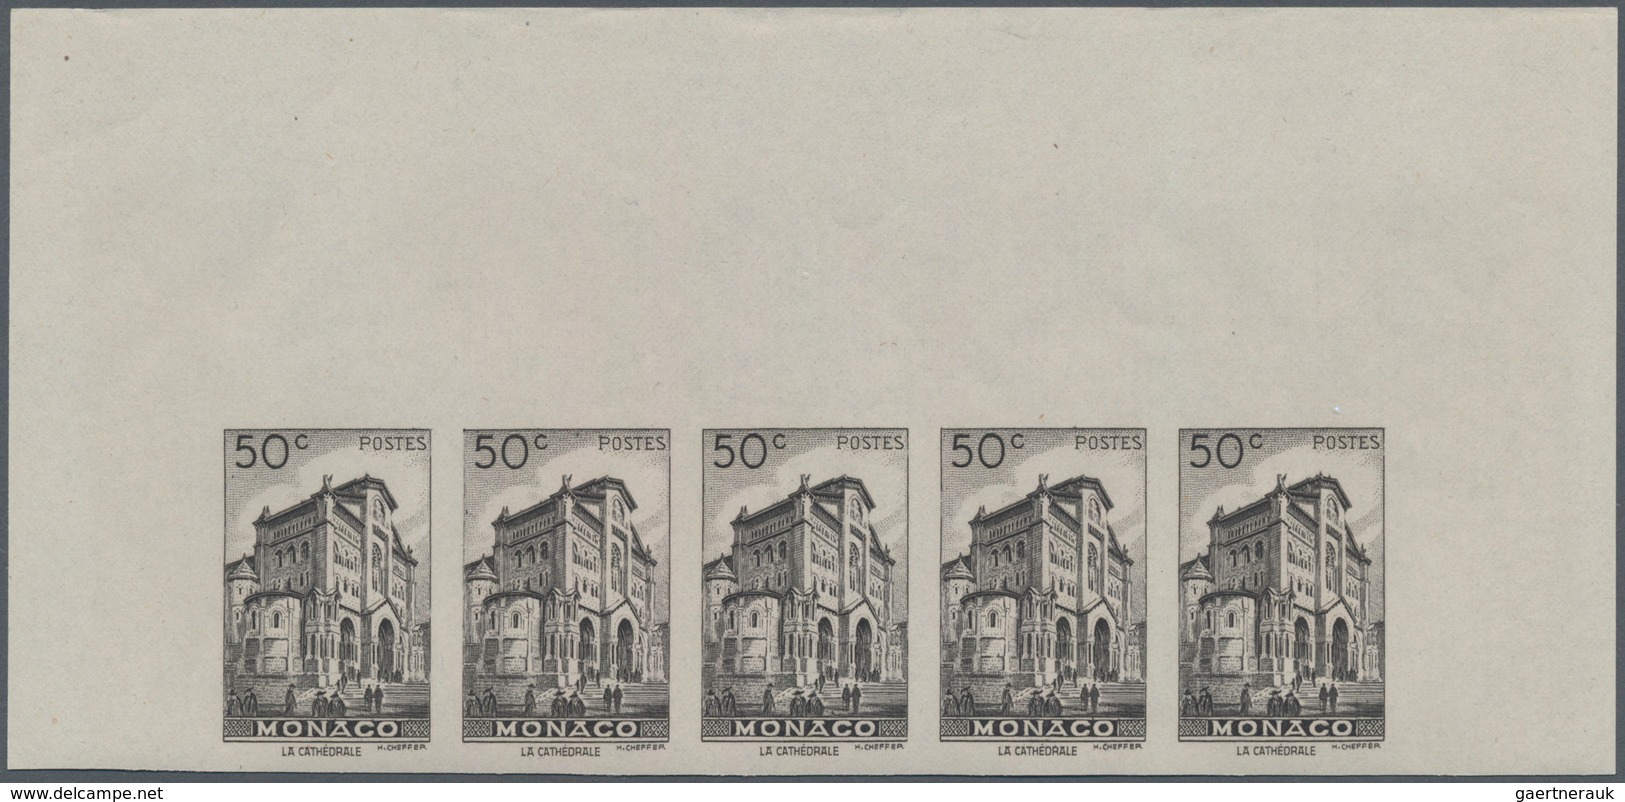 Monaco: 1948/1949, pictorial definitives complete set of 13 in IMPERFORATE marginal strips of five,